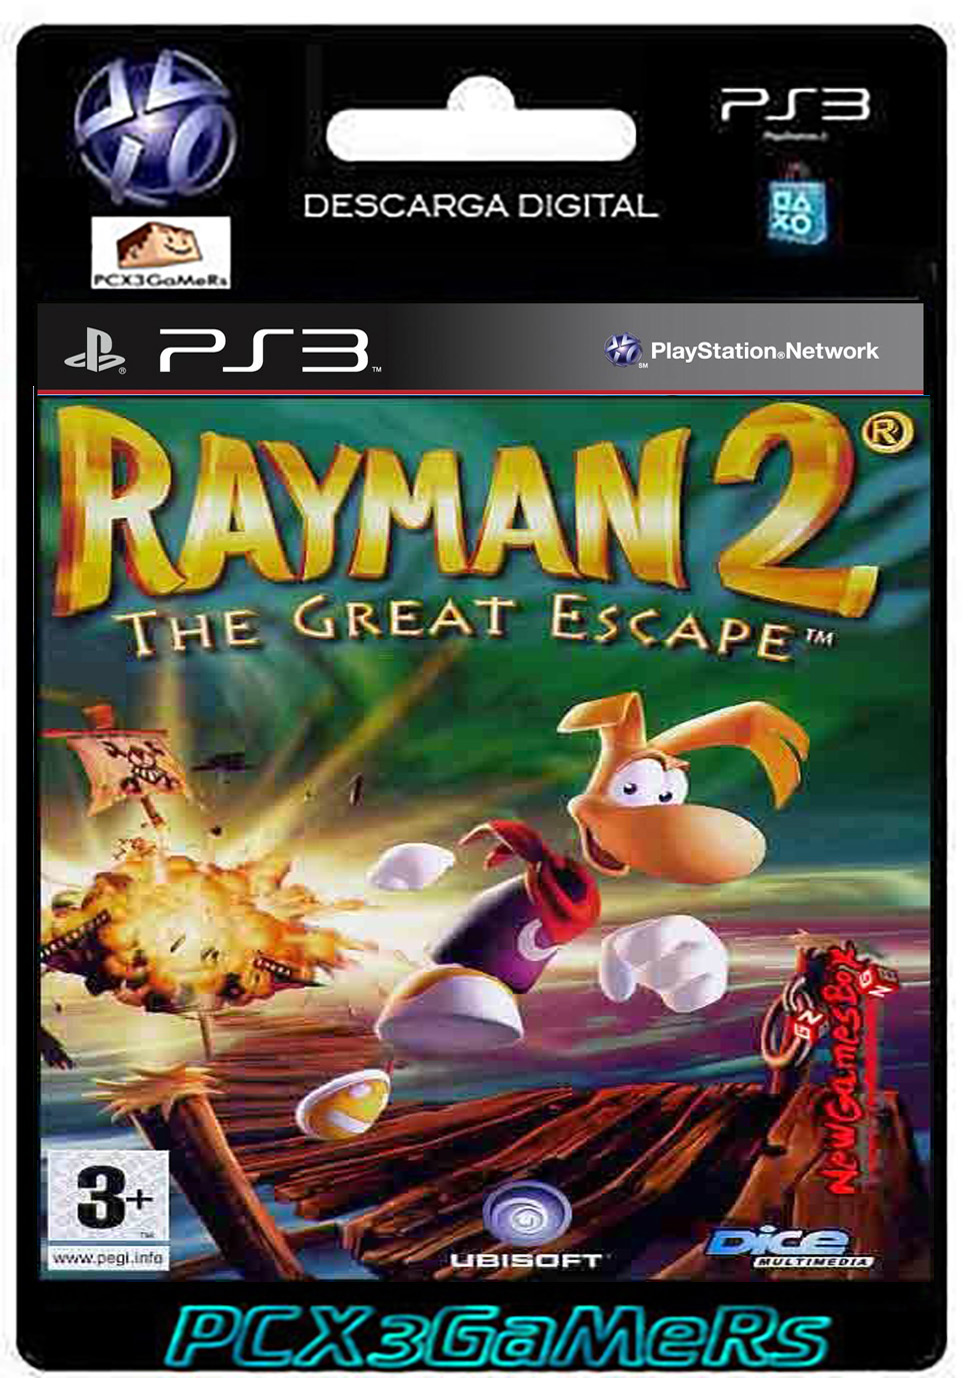 gids Afleiding kristal PS3 Rayman 2: The Great Escape®